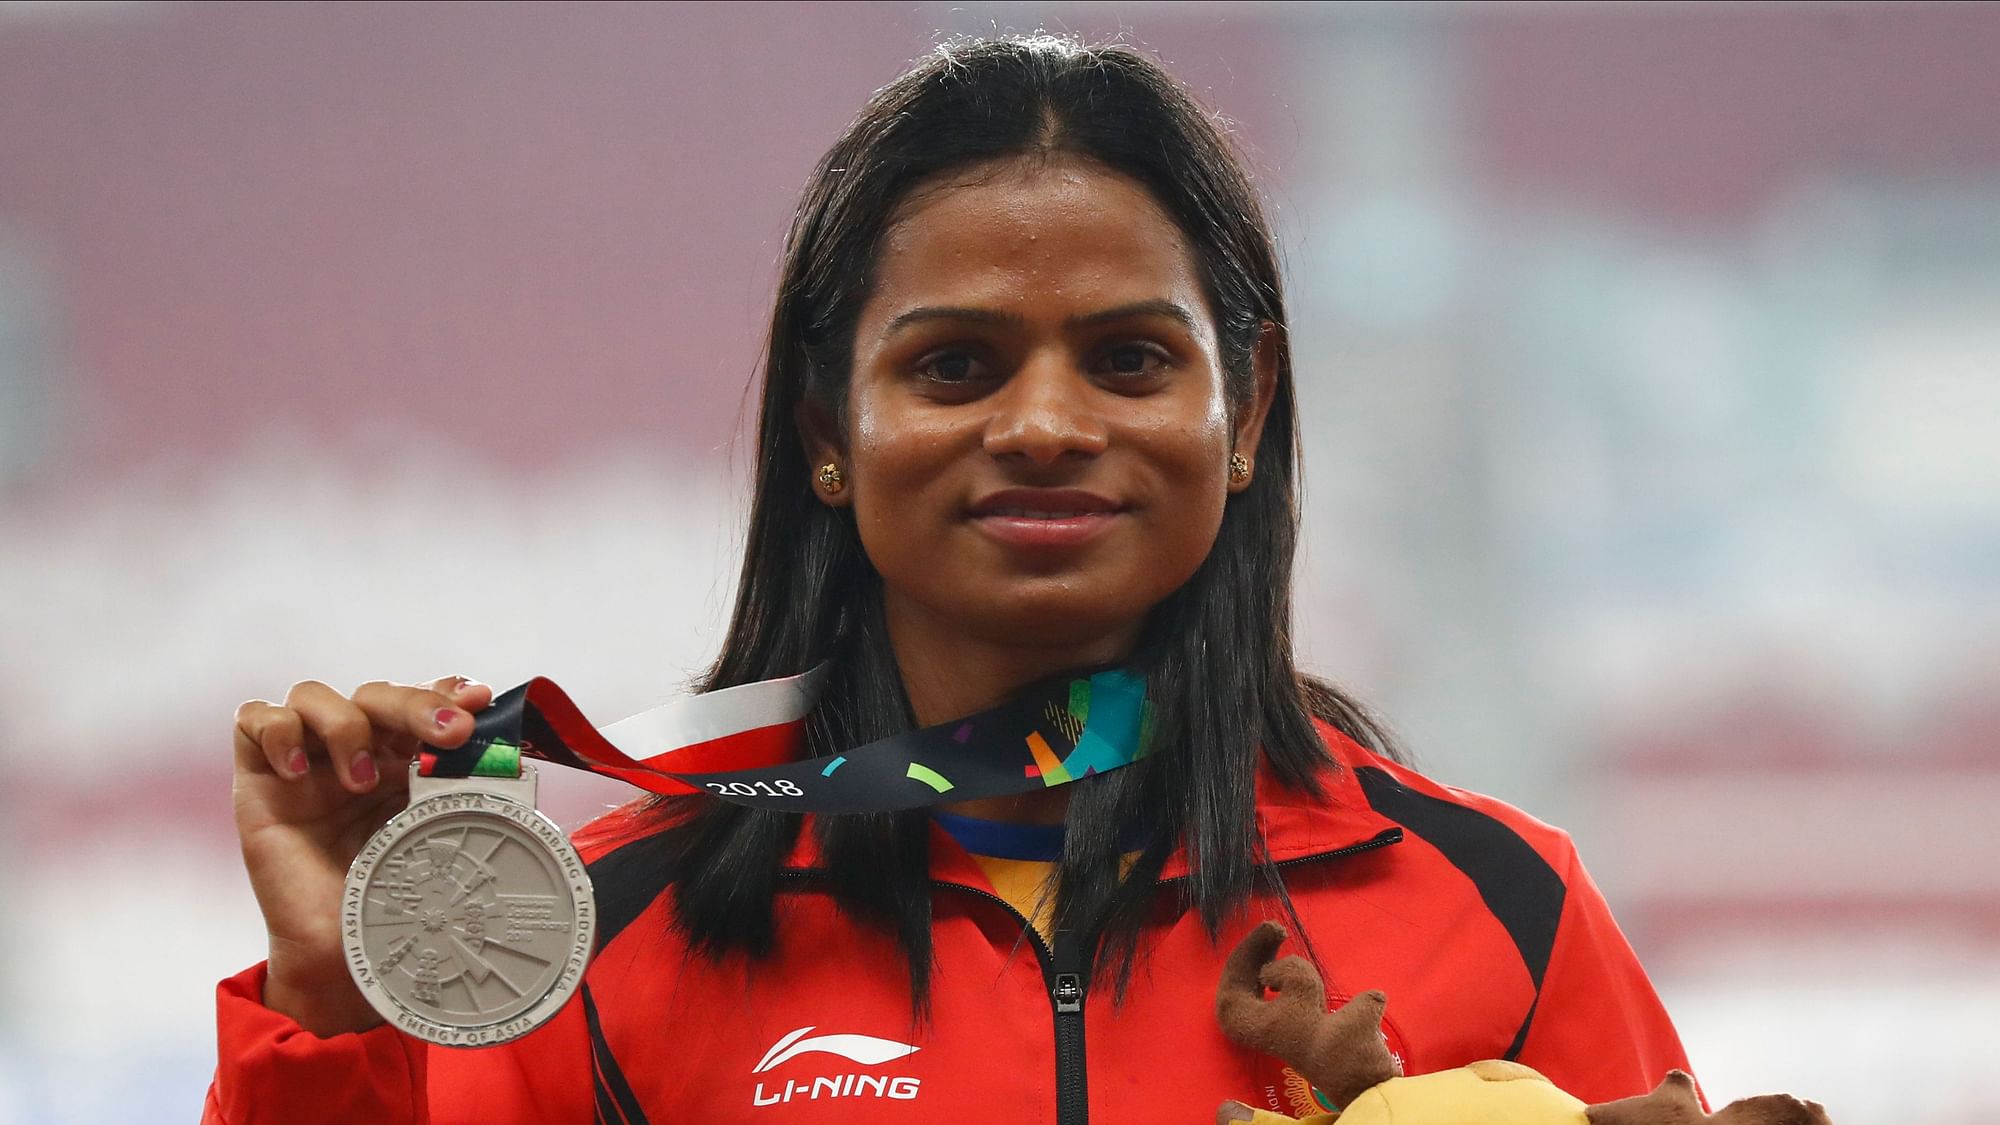 Indian runner Dutee Chand speaks out in support of Caster Semenya.